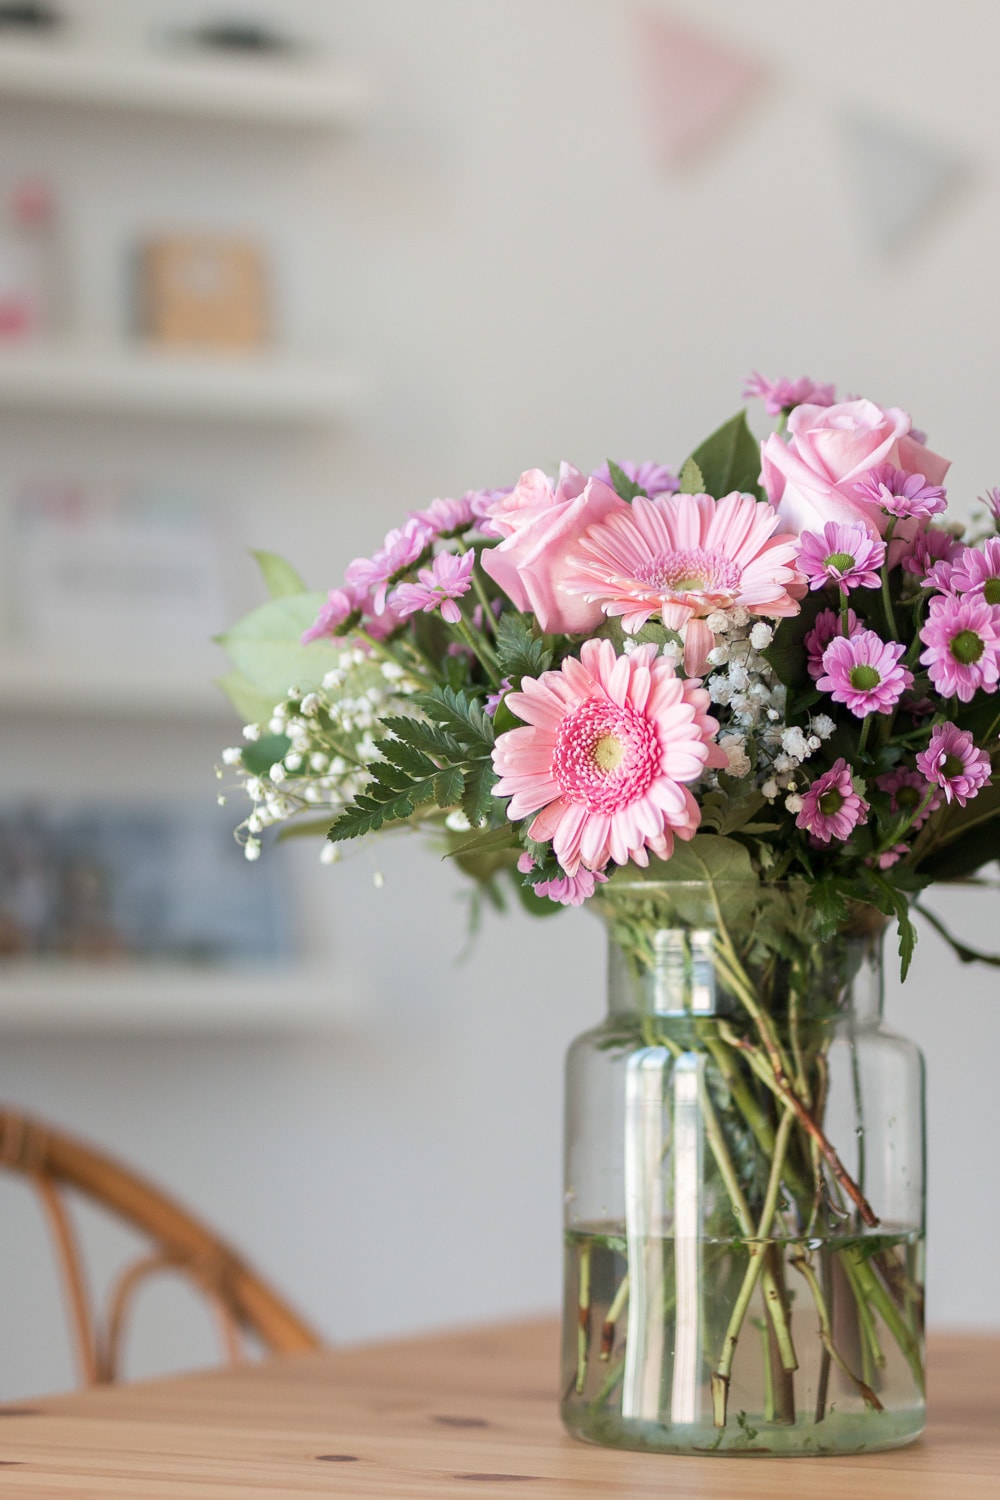 Bouquet of pink roses and gerberas on table